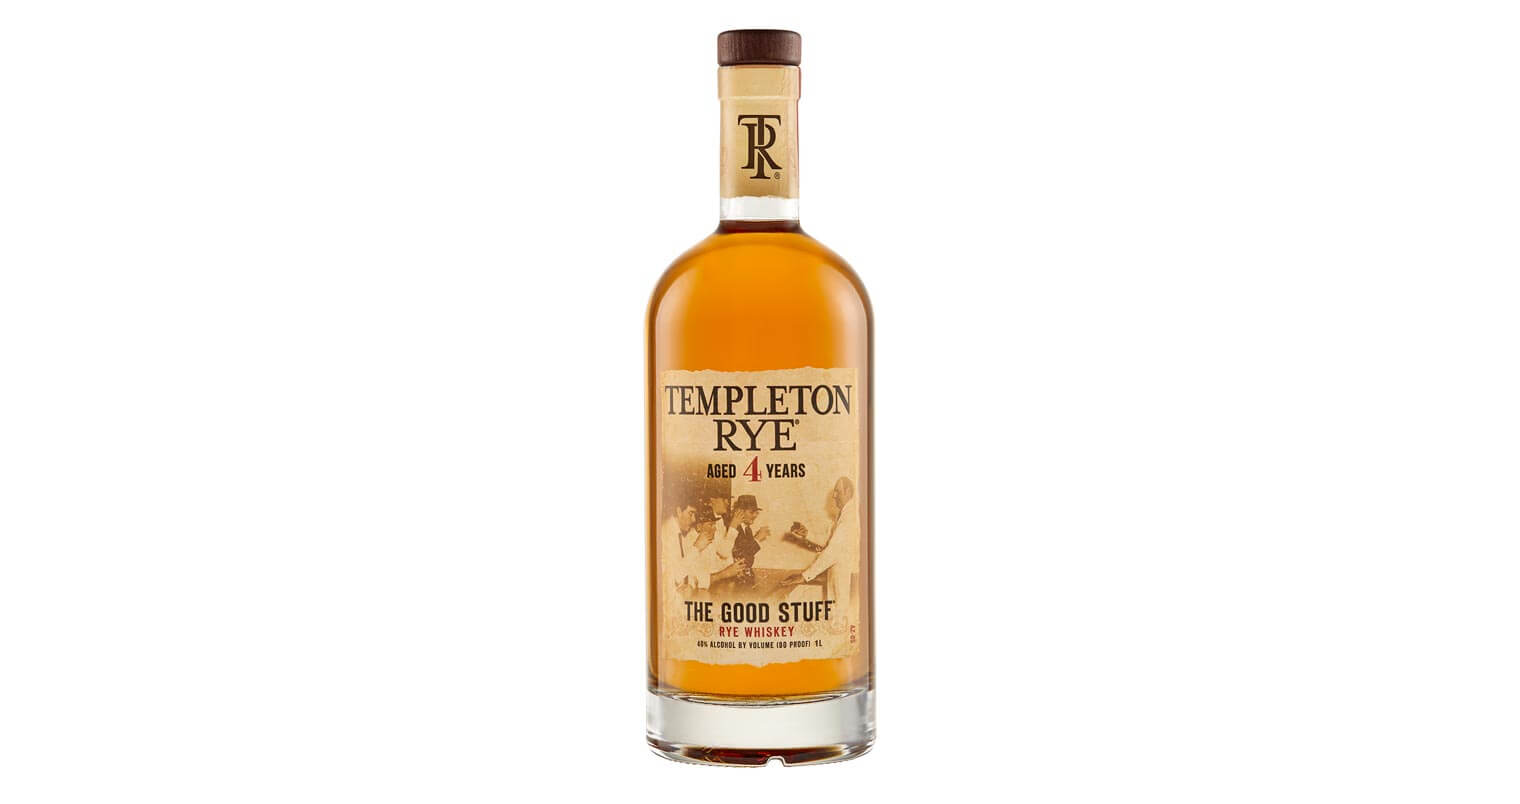 Templeton Rye Debuts 1 Liter Size of The Good Stuff, featured image